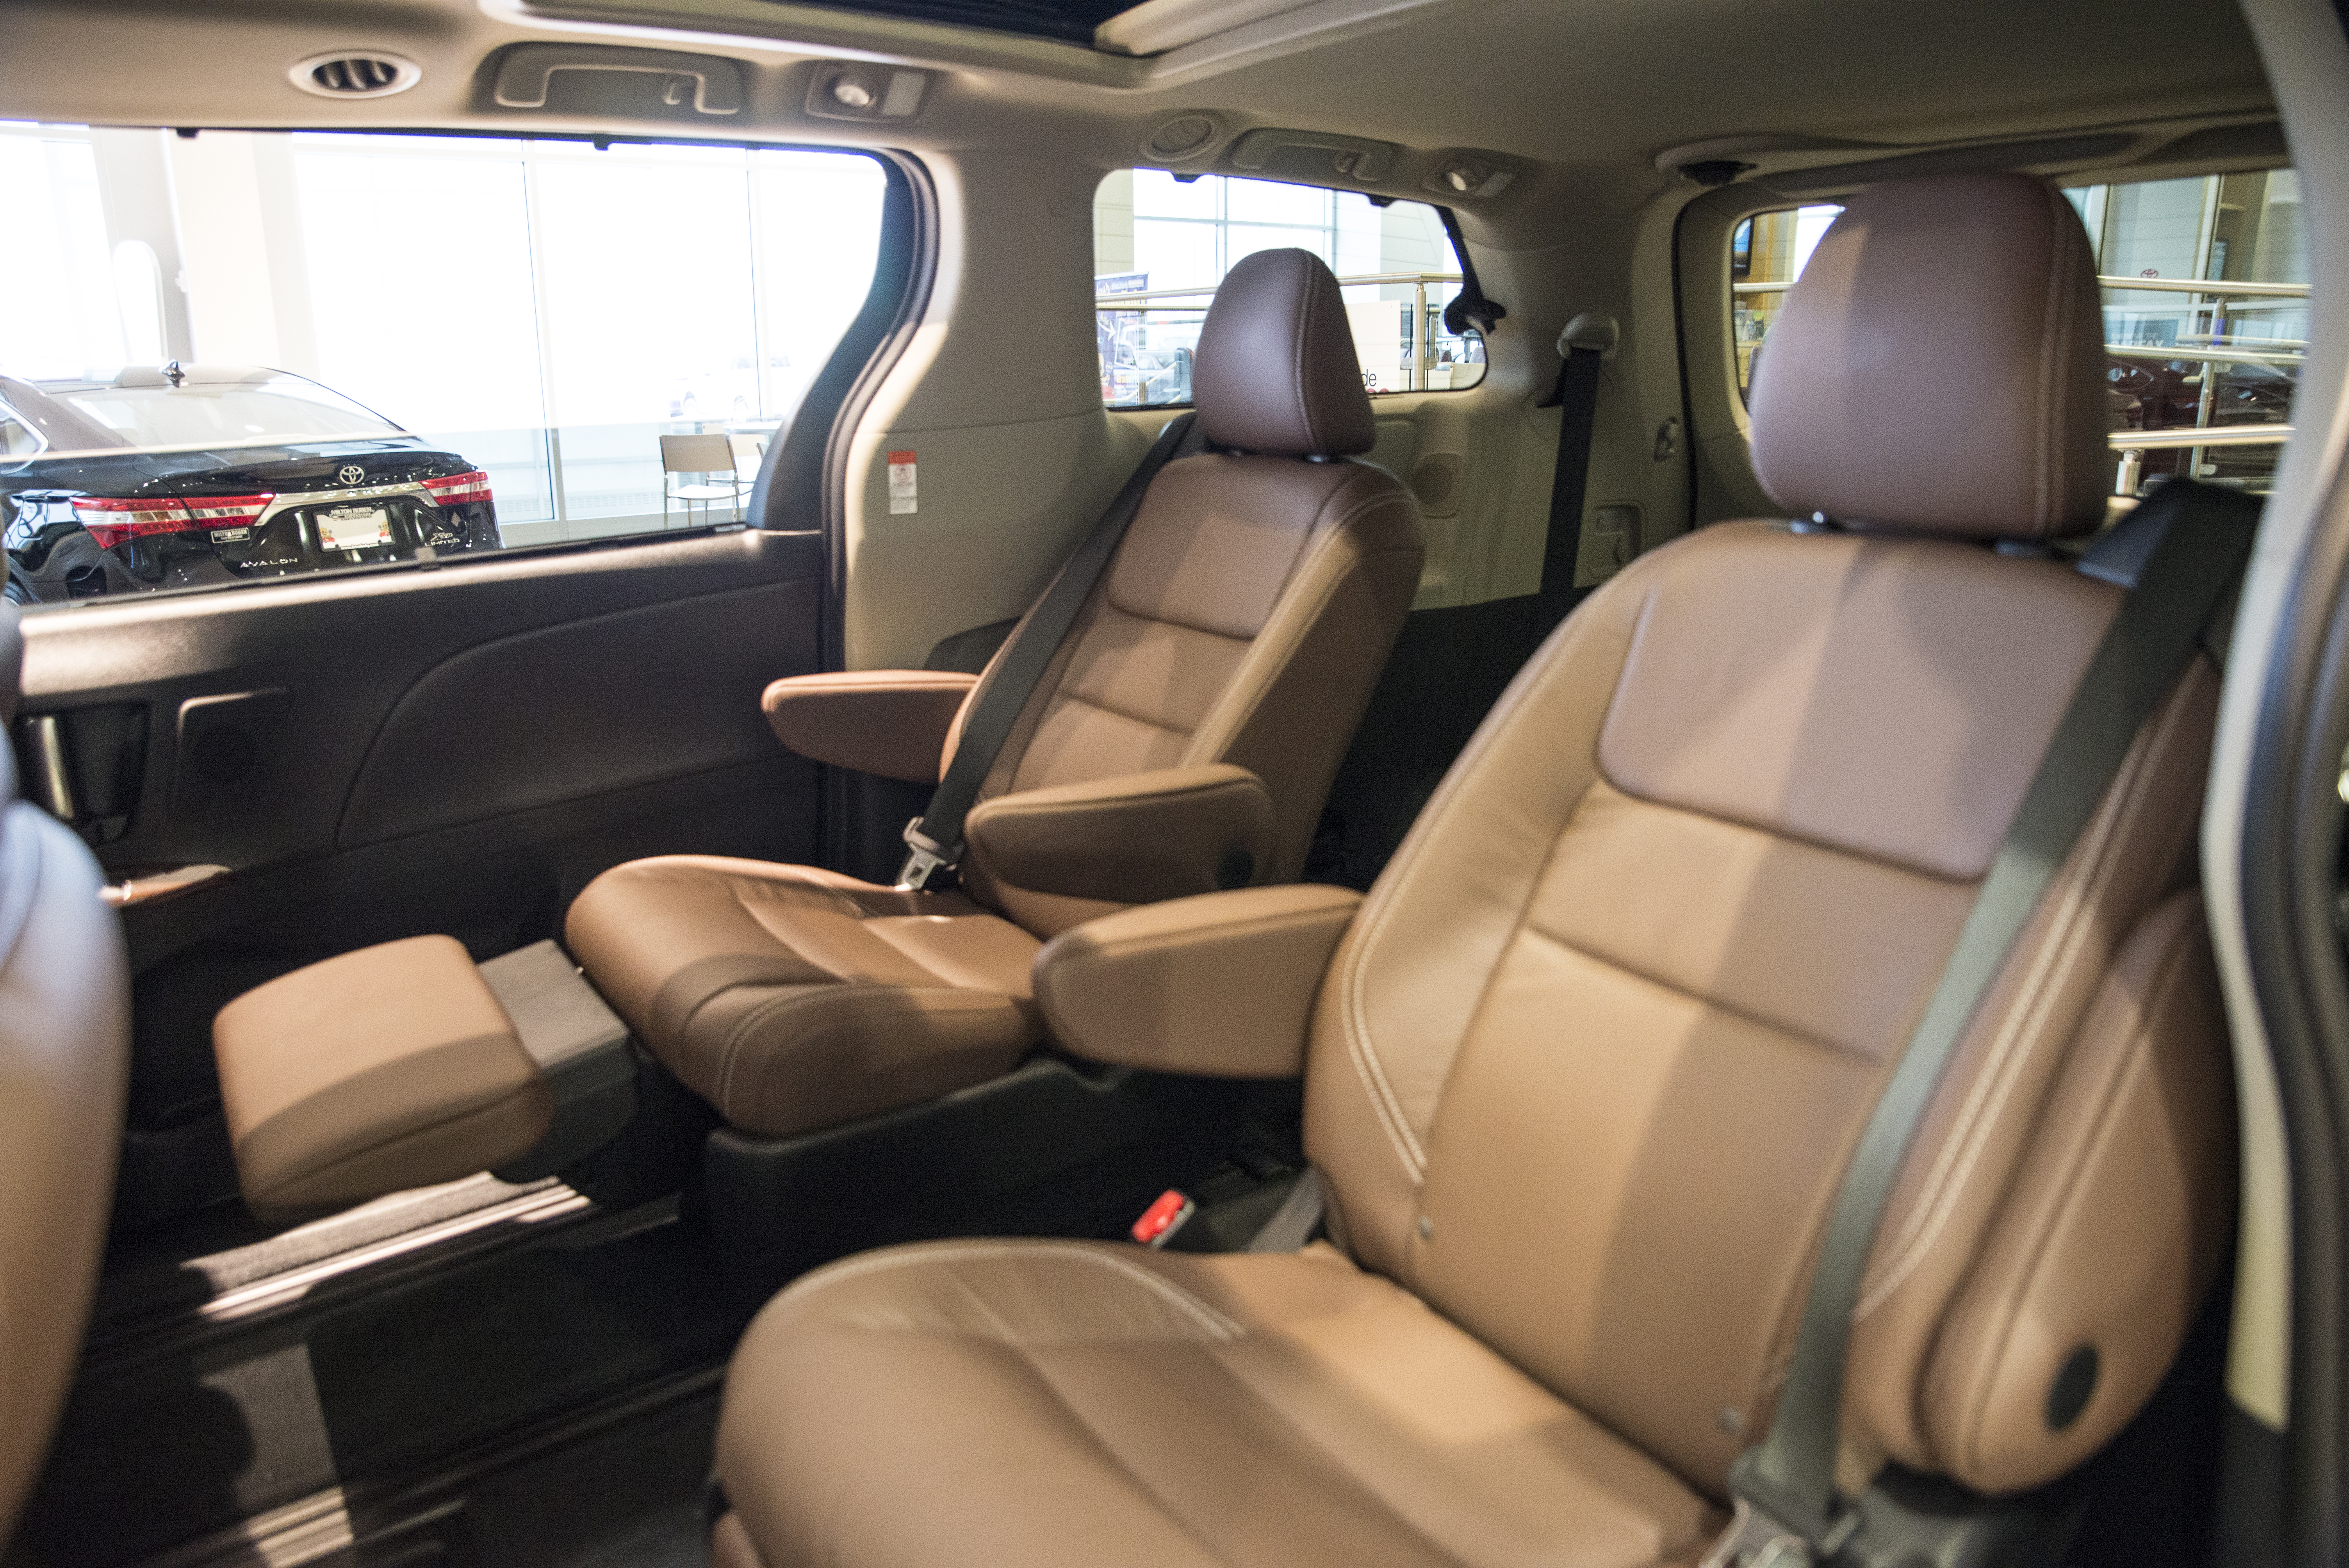 15 Things We Love About The New 2015 Toyota Sienna